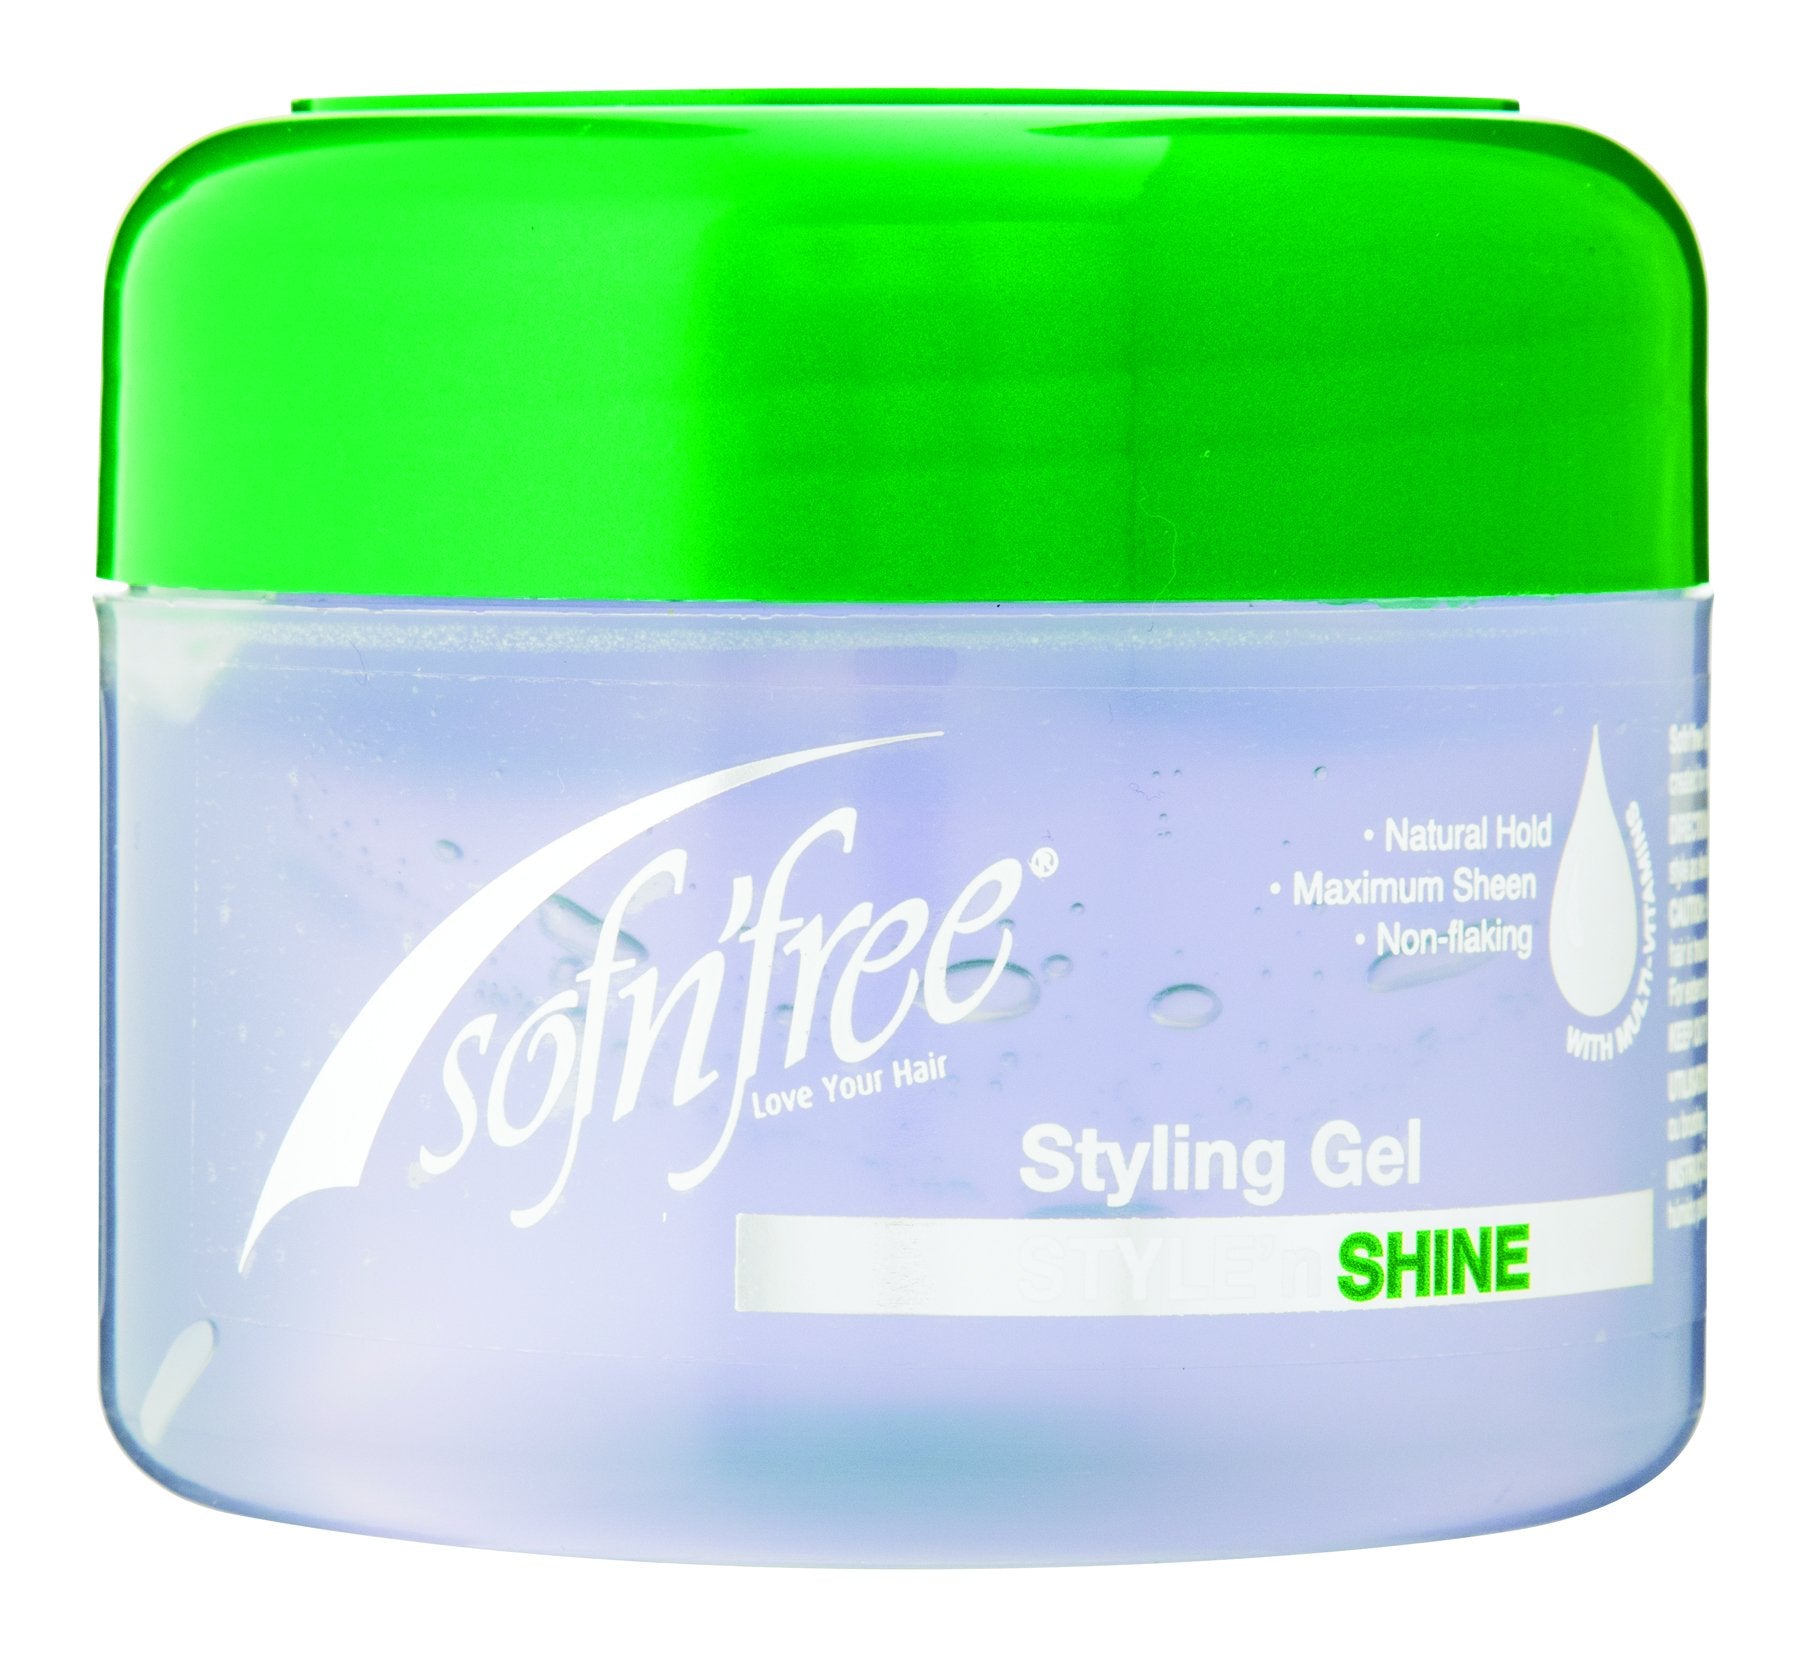 Sofnfree styling gel natural hold 250ml